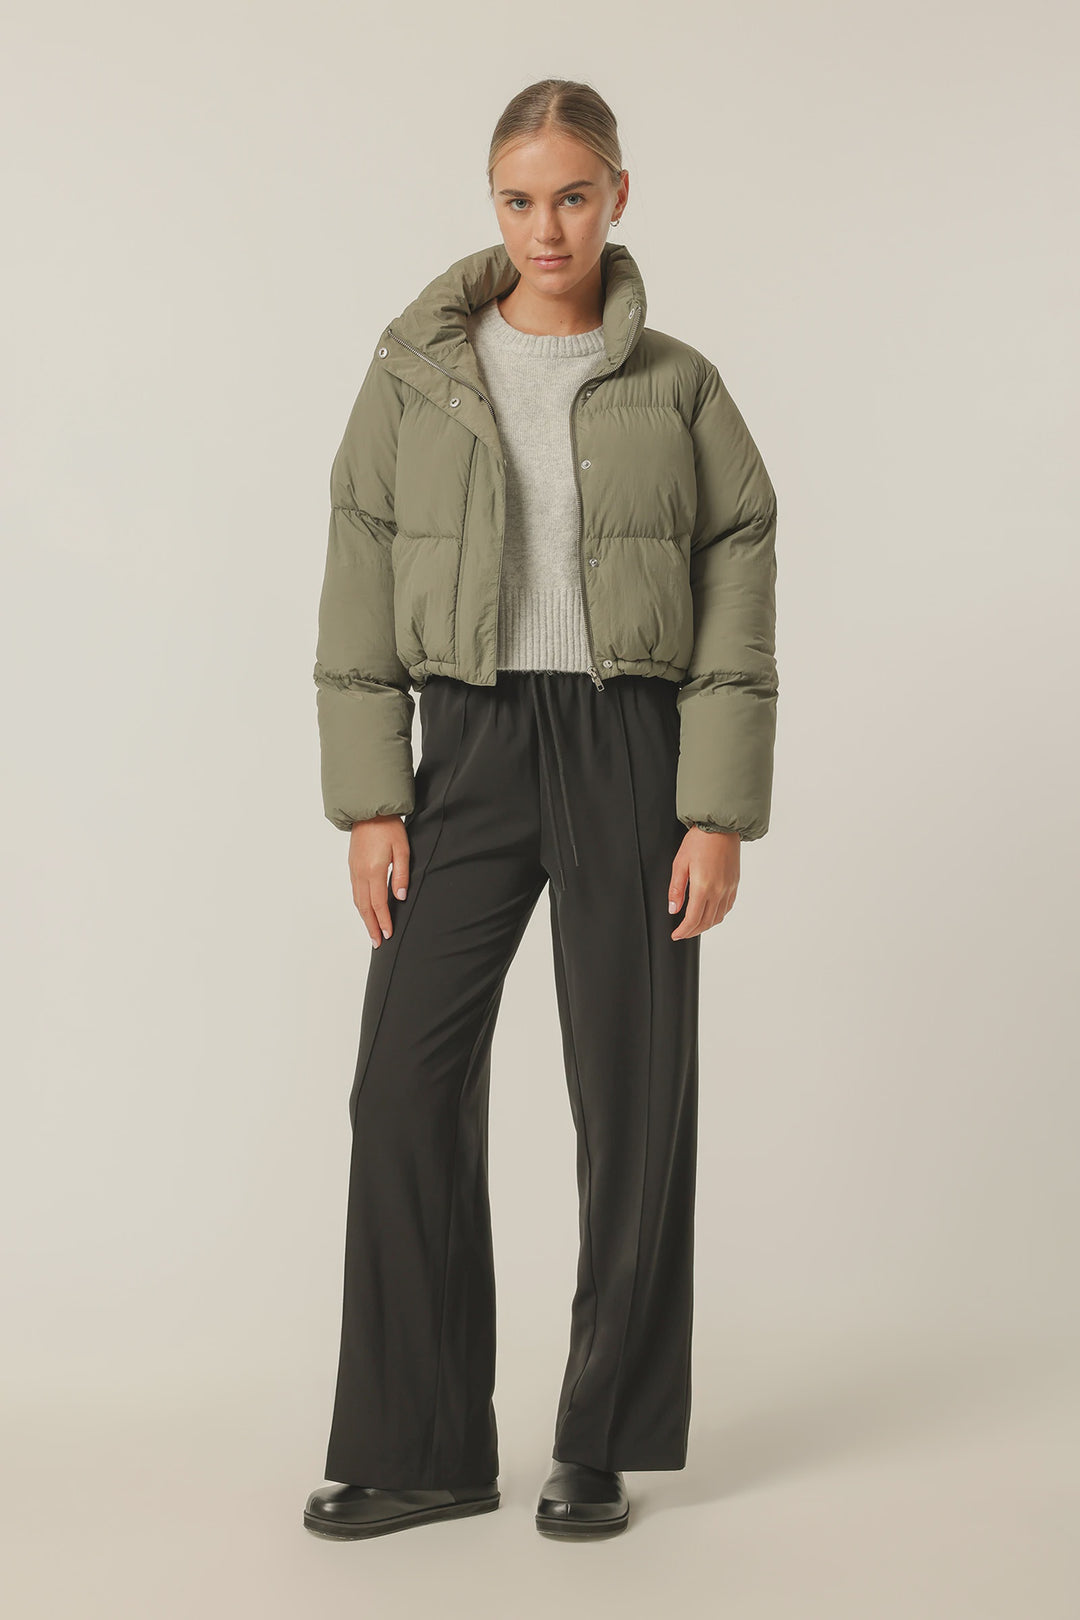 Topher Puffer Jacket - Willow